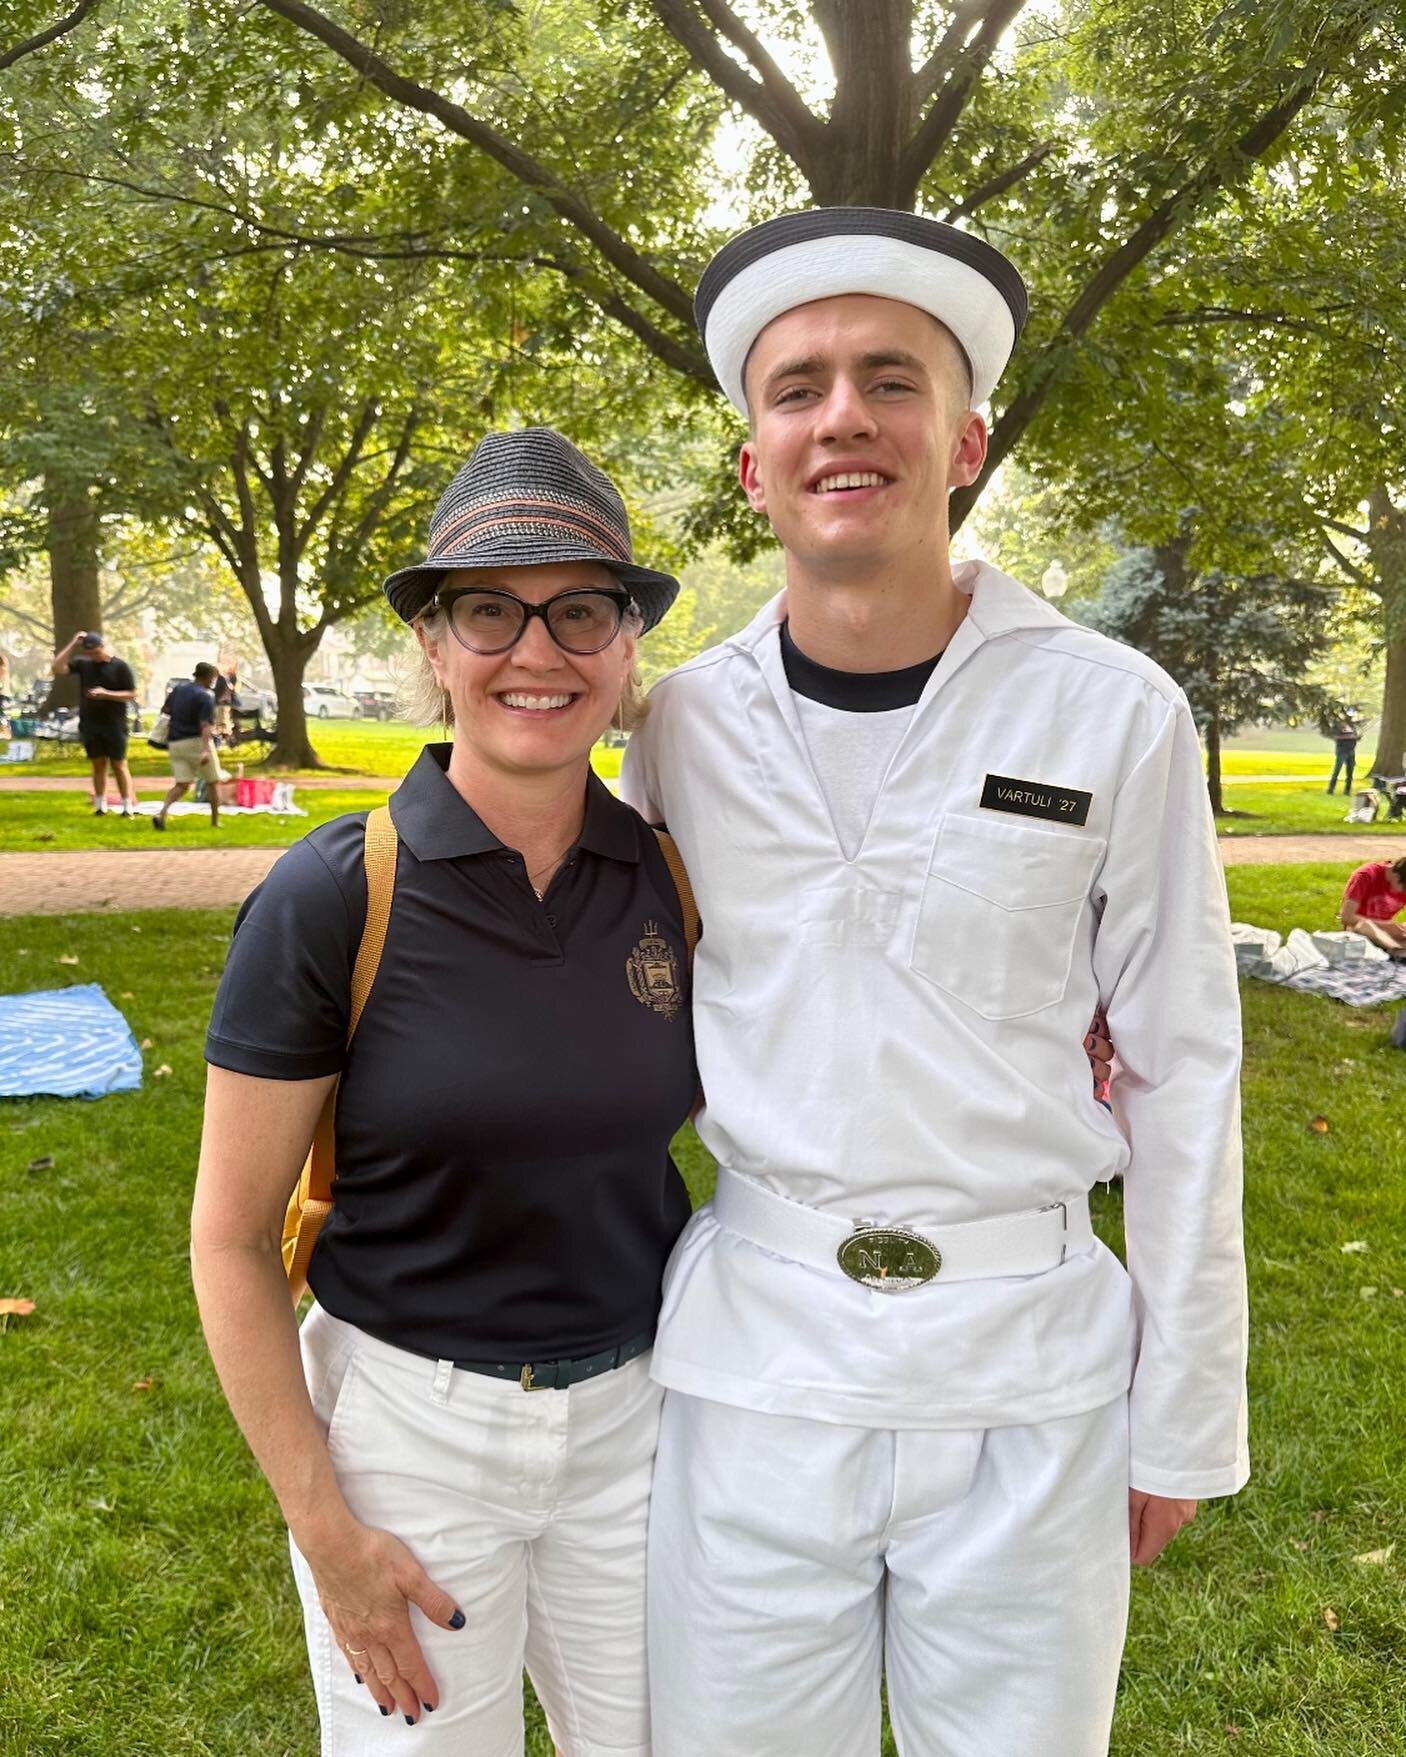 Newest Midshipman William Vartuli ( Mom, Ann Vartuli) was inducted 6/29/2023 into The United States Naval Academy. Interesting in majoring in Engineering and triathlon. Go Navy!!🫡🇺🇸